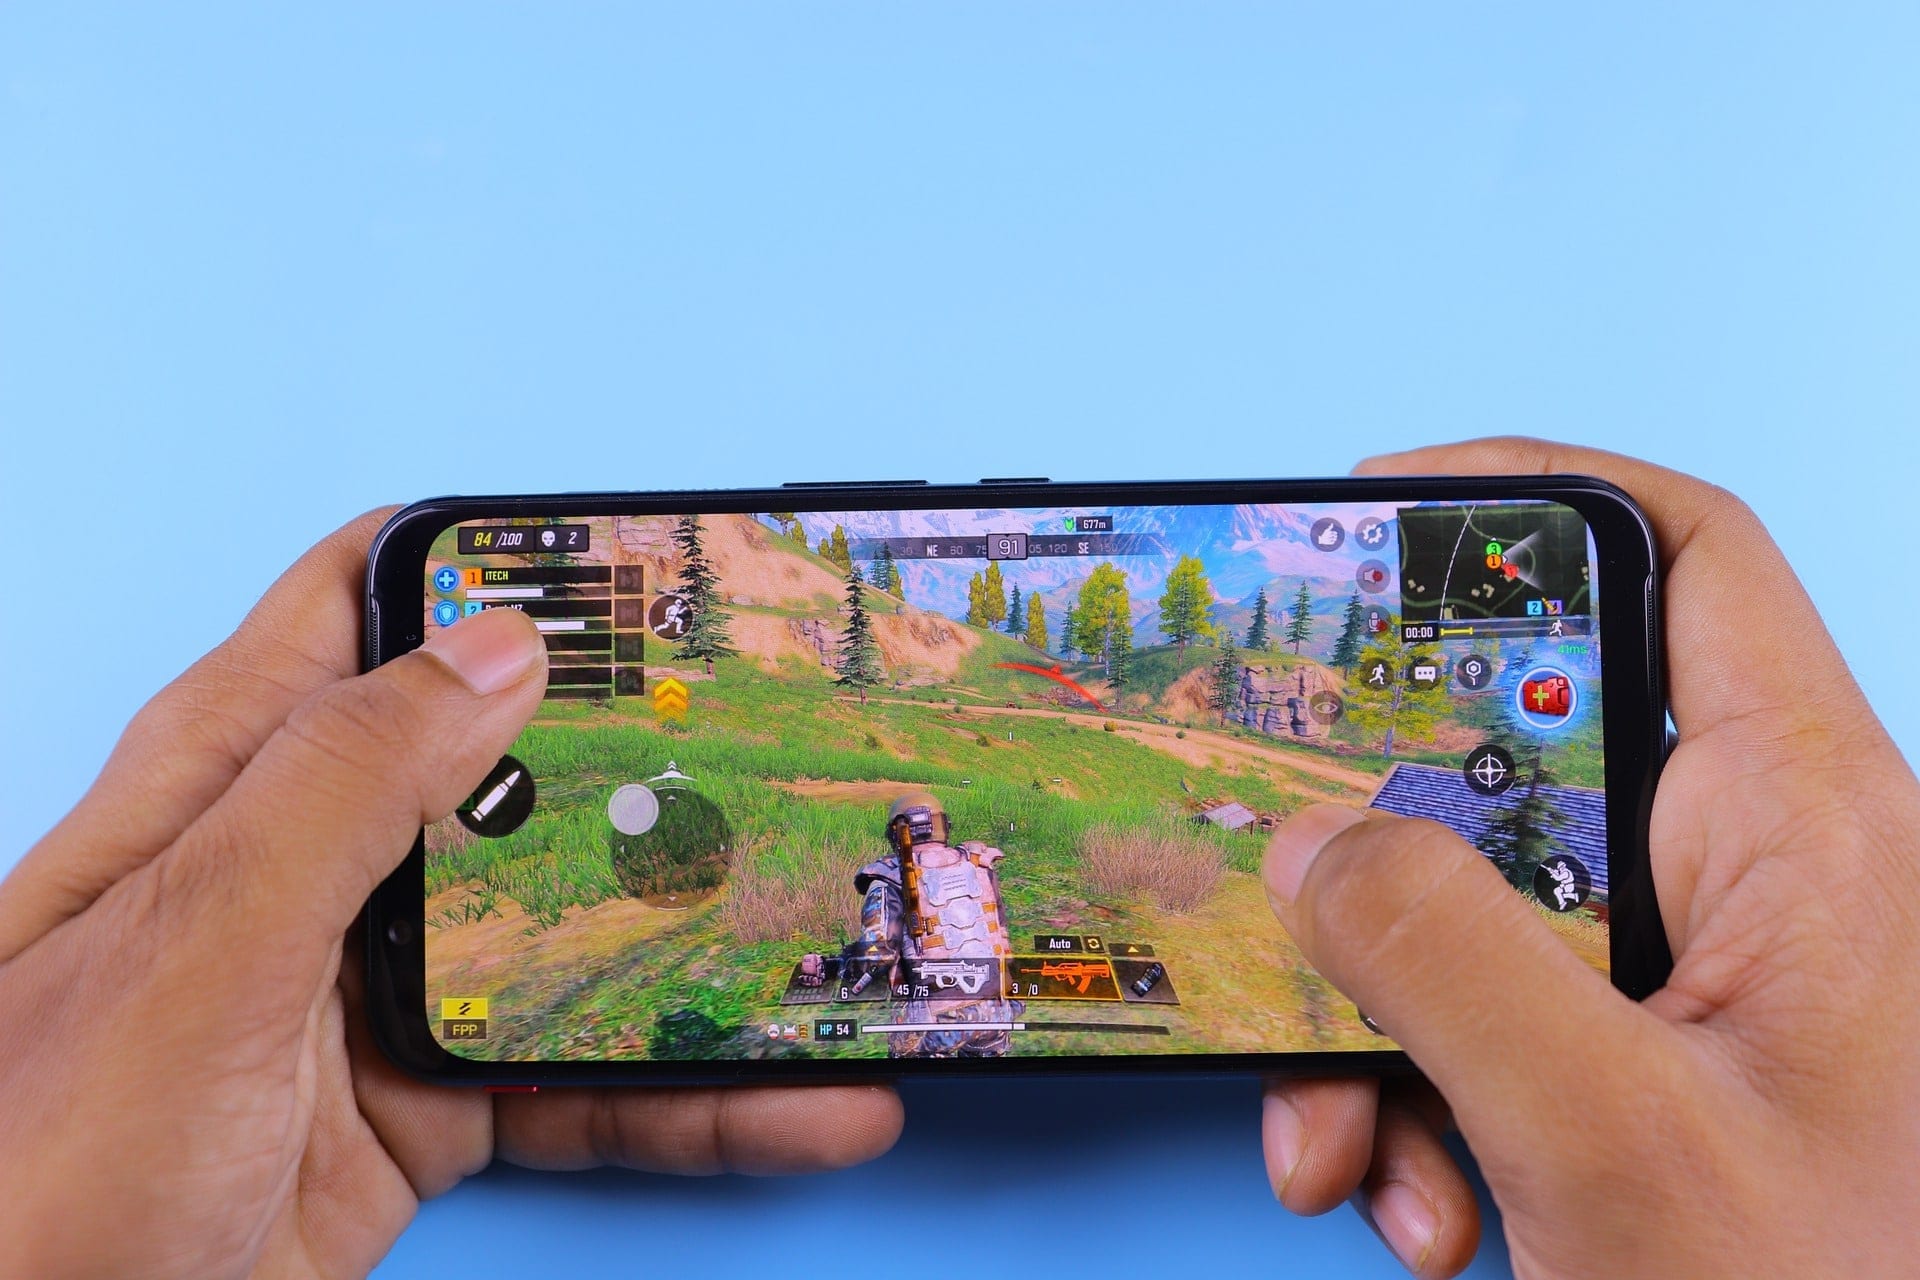 Seven Things to Look for in an Android Gaming Device